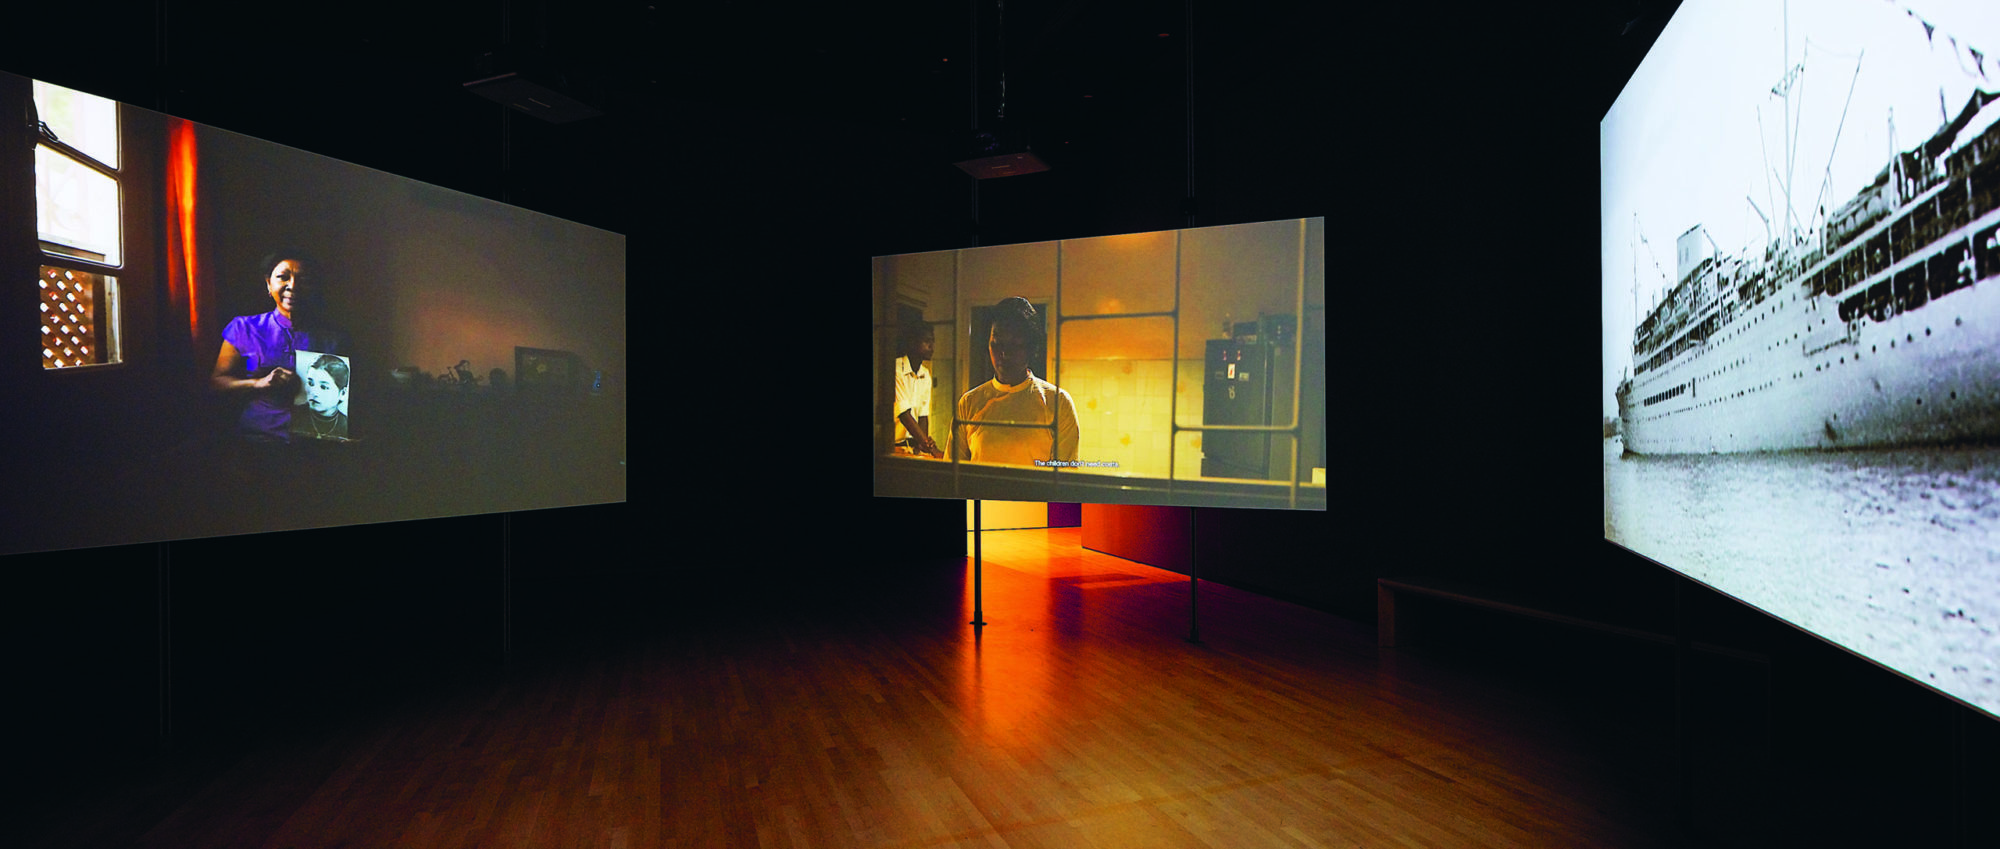 Installation view of Tuan Nguyen's work in which three videos play simultaneously in the same room